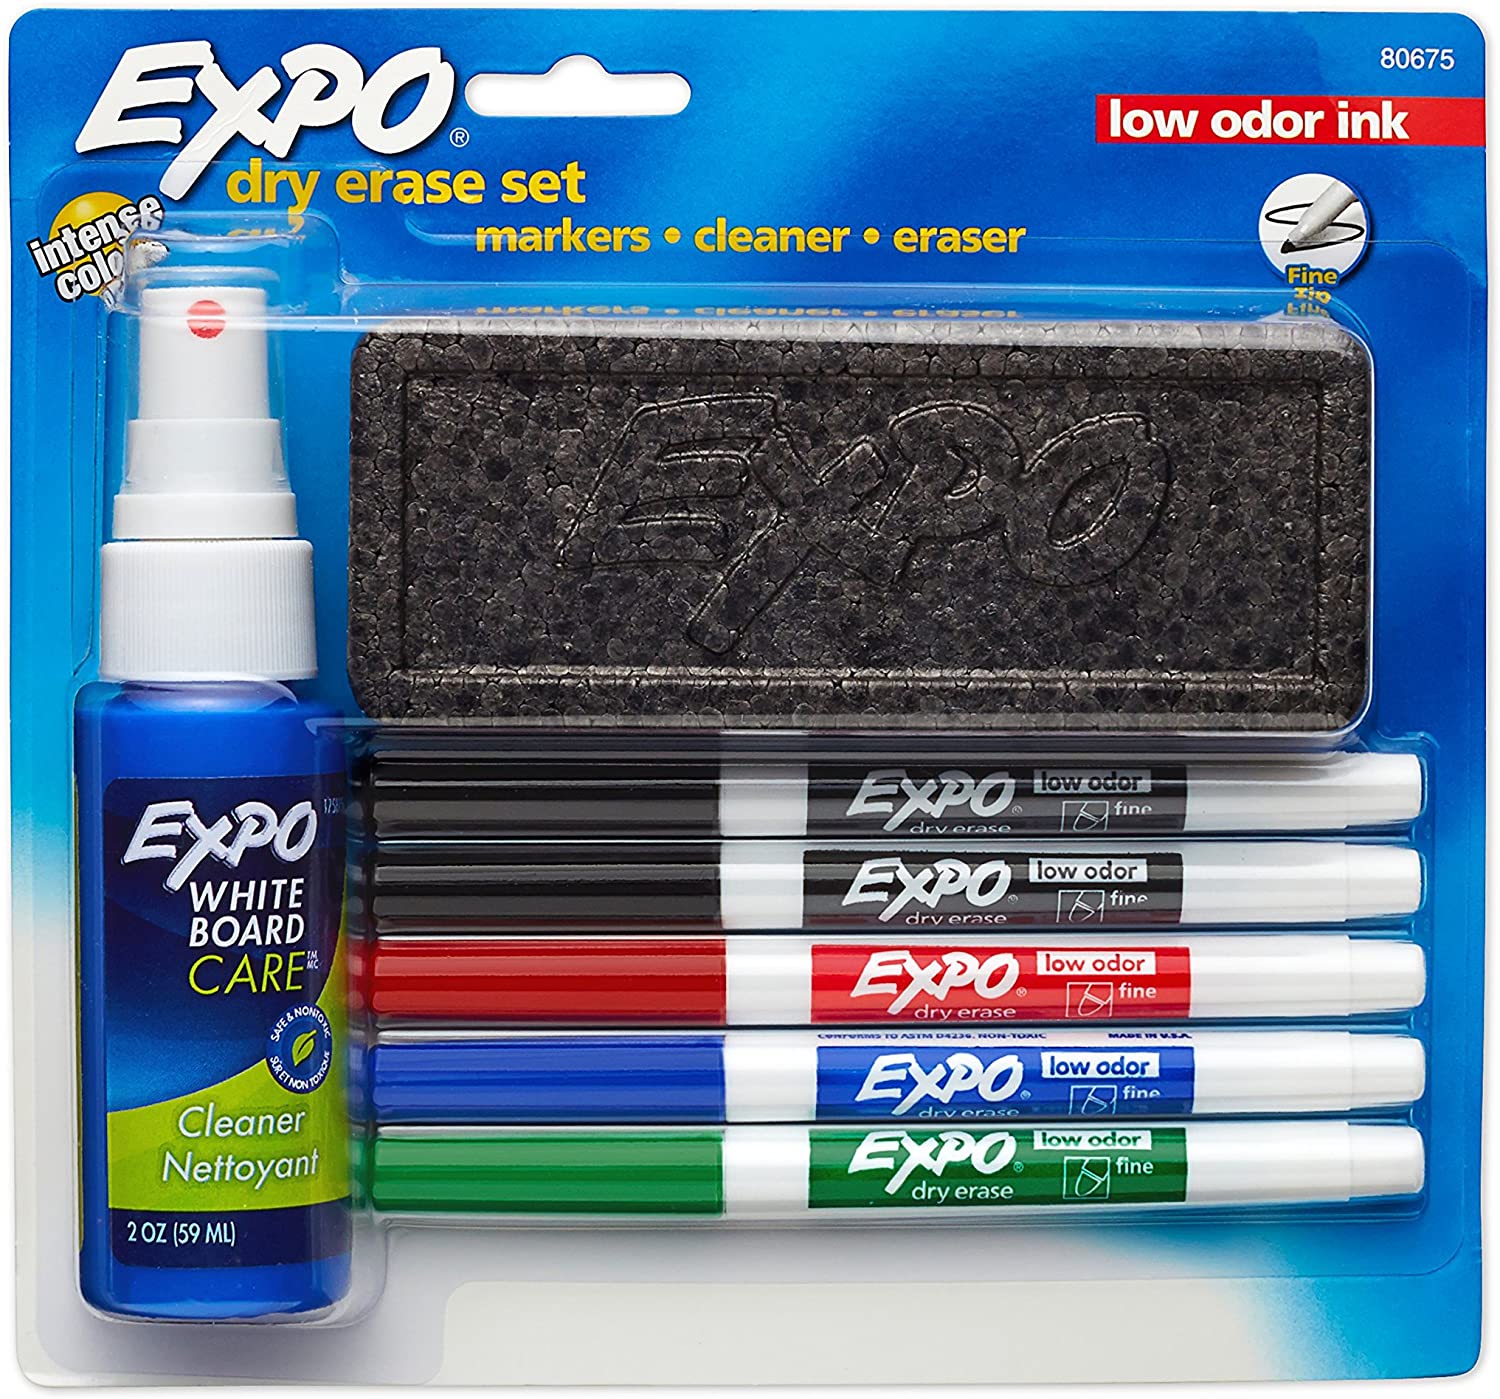 EXPO Low Odor Dry Erase Marker Set with White Board Eraser and Cleaner